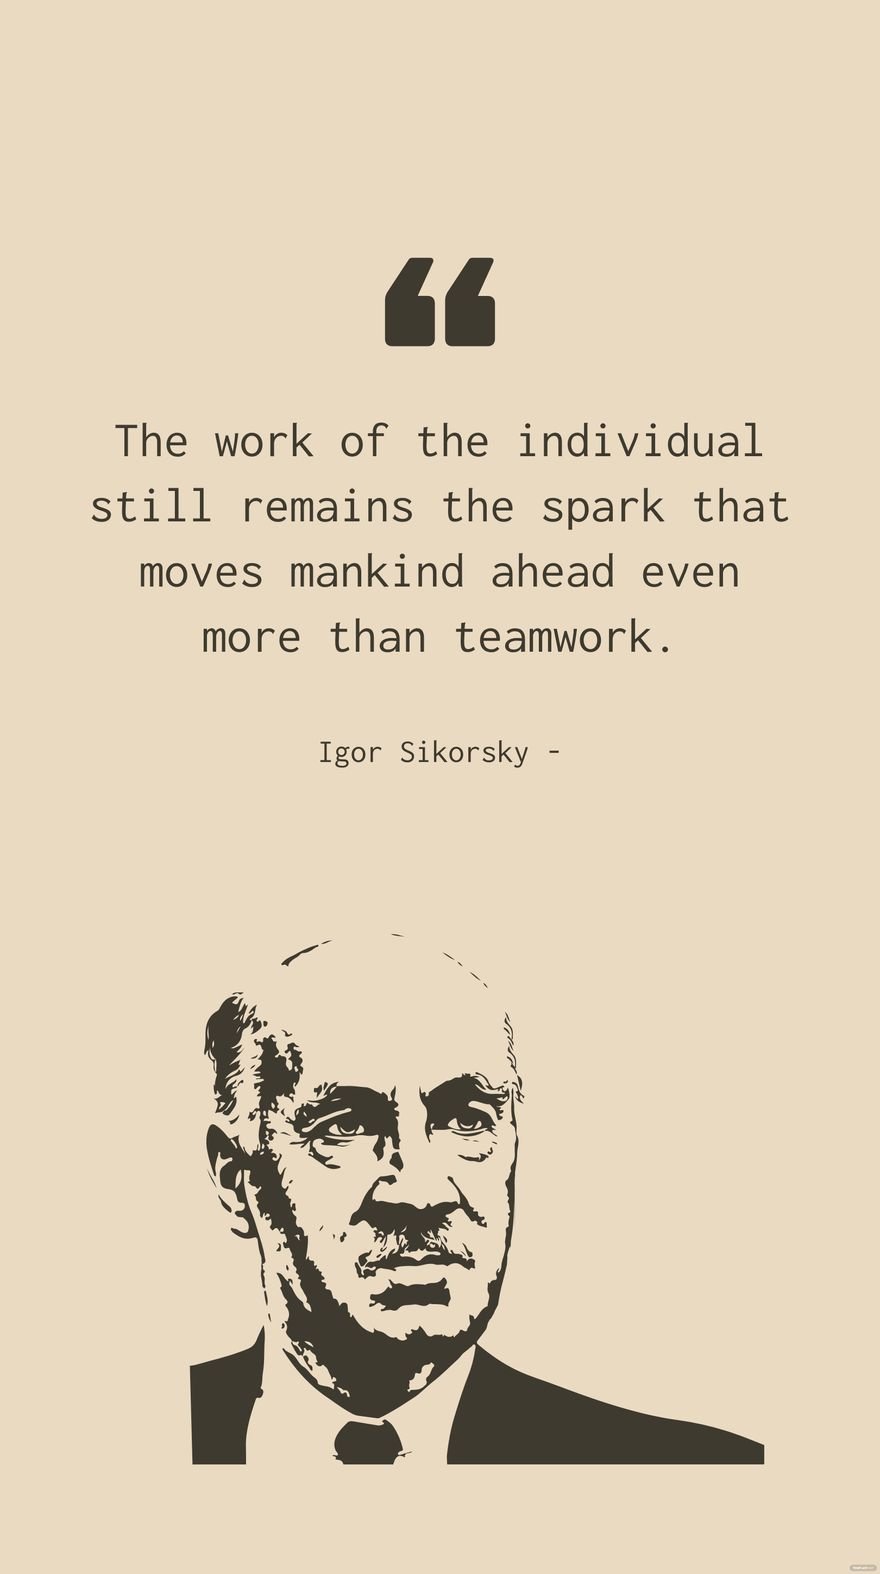 Free Igor Sikorsky - The work of the individual still remains the spark that moves mankind ahead even more than teamwork.